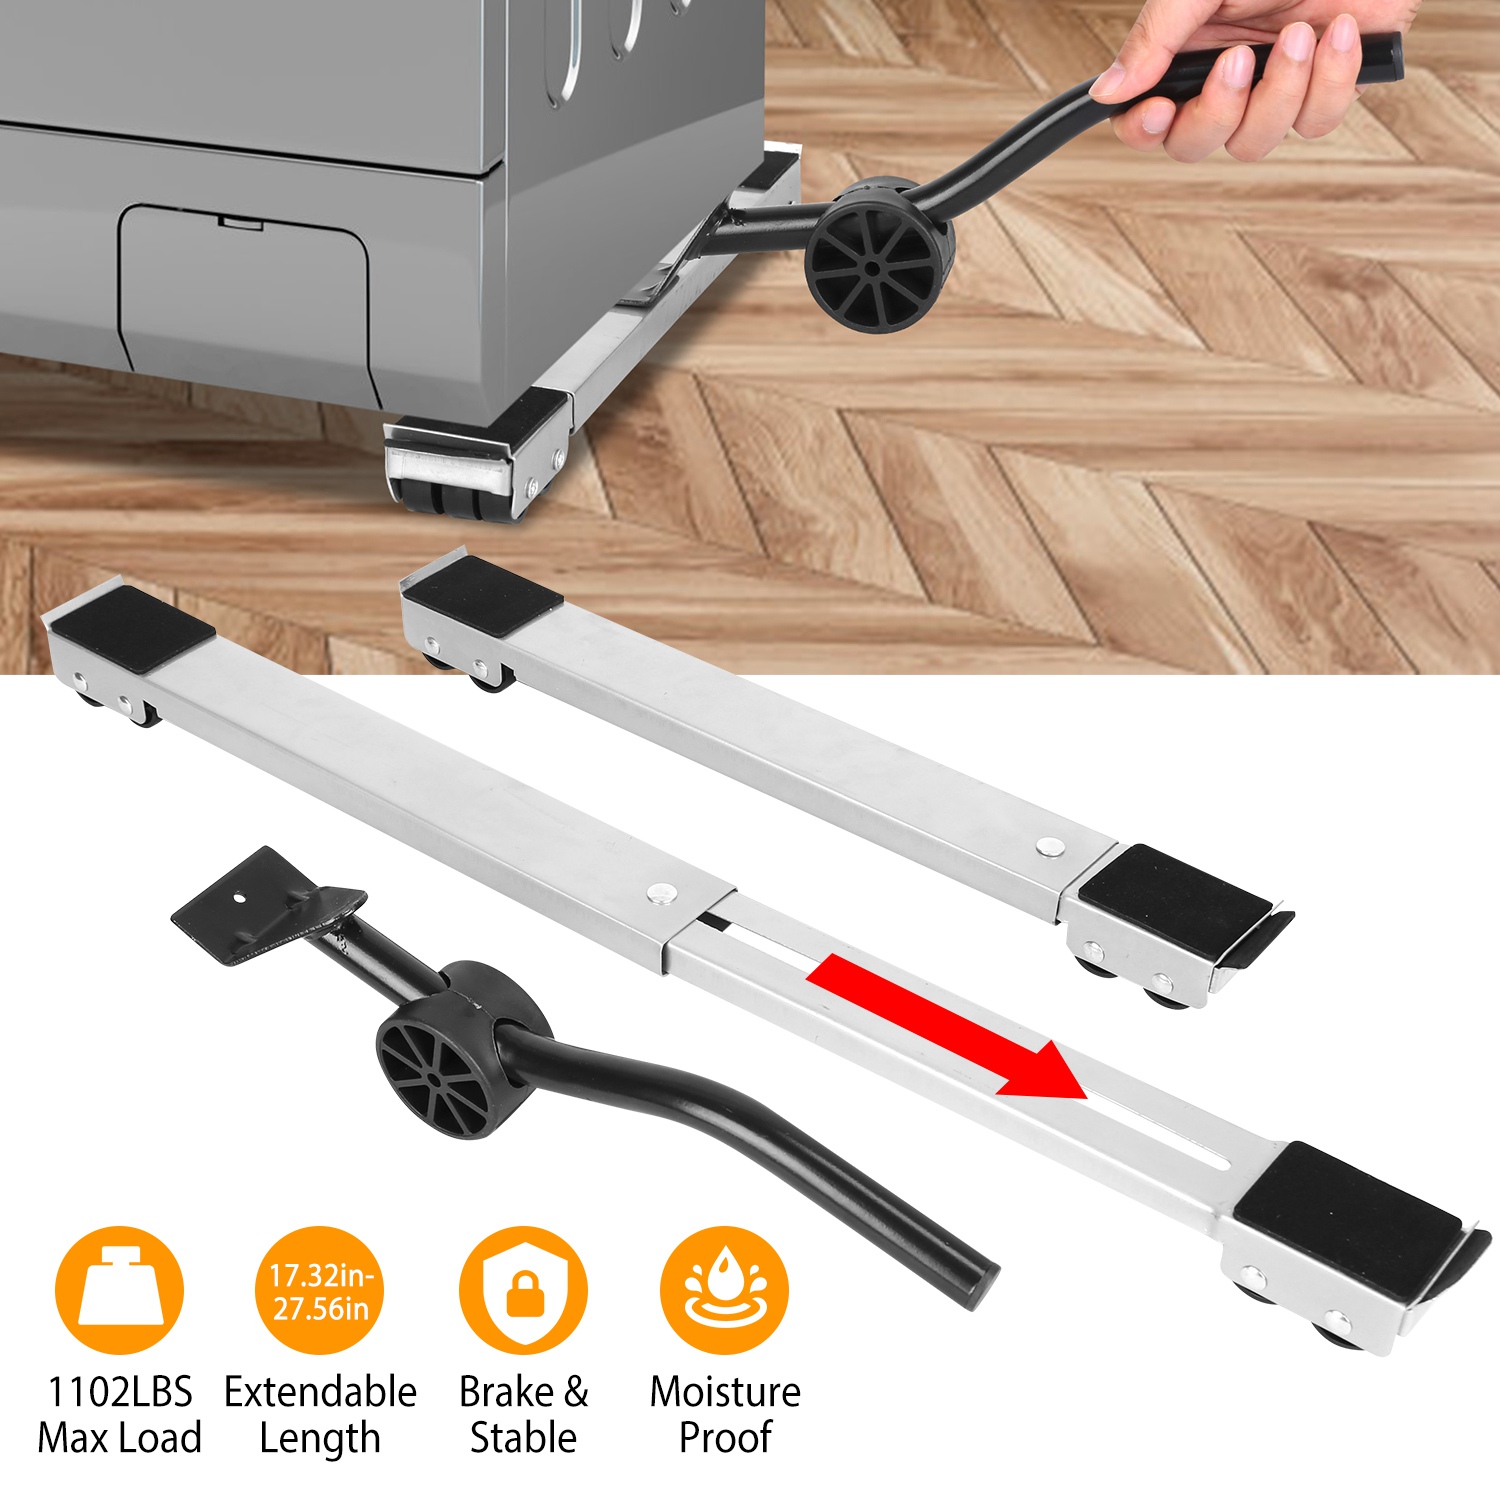 Furniture Dolly, iMountek Adjustable Mobile Roller, Heavy Duty Appliance  Furniture Rolling Base Stand with Brake Pry for Washing Machines,  Refrigerators, Dryers, Dishwashers and Heavy Objects 